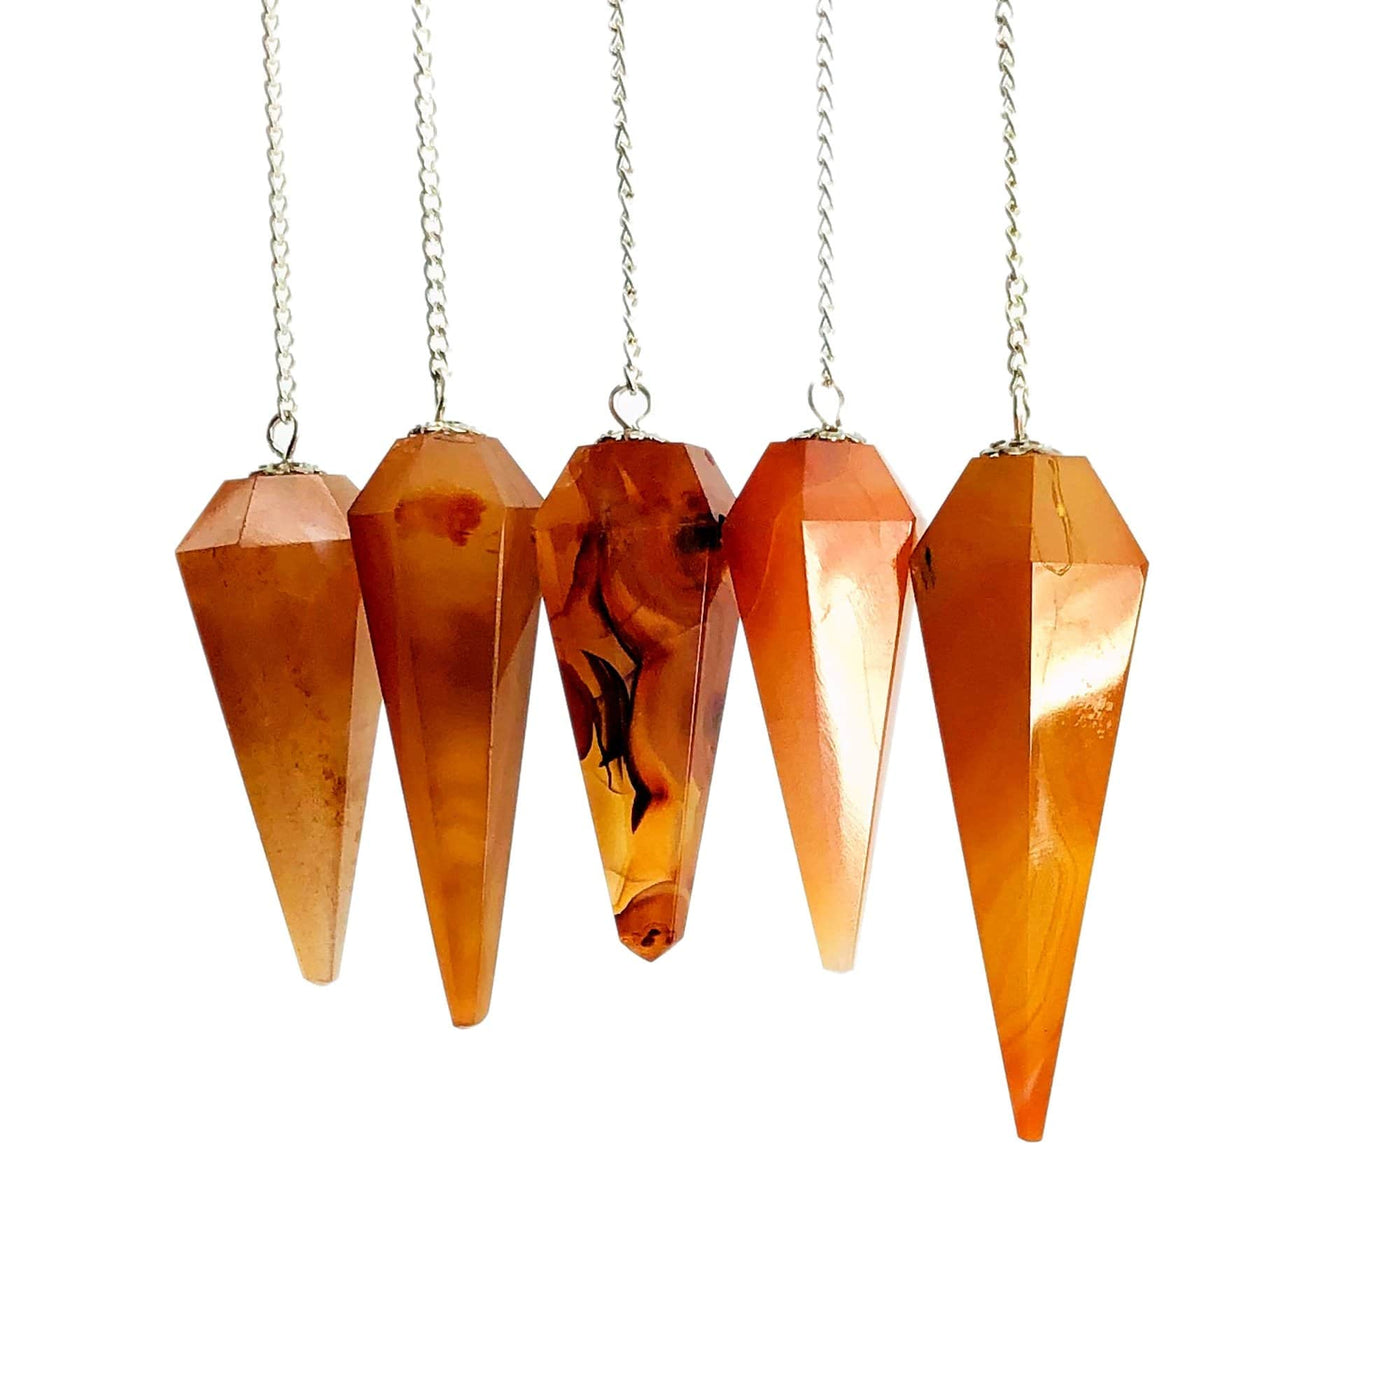 5 carnelian pendulums on silver chains with a white background